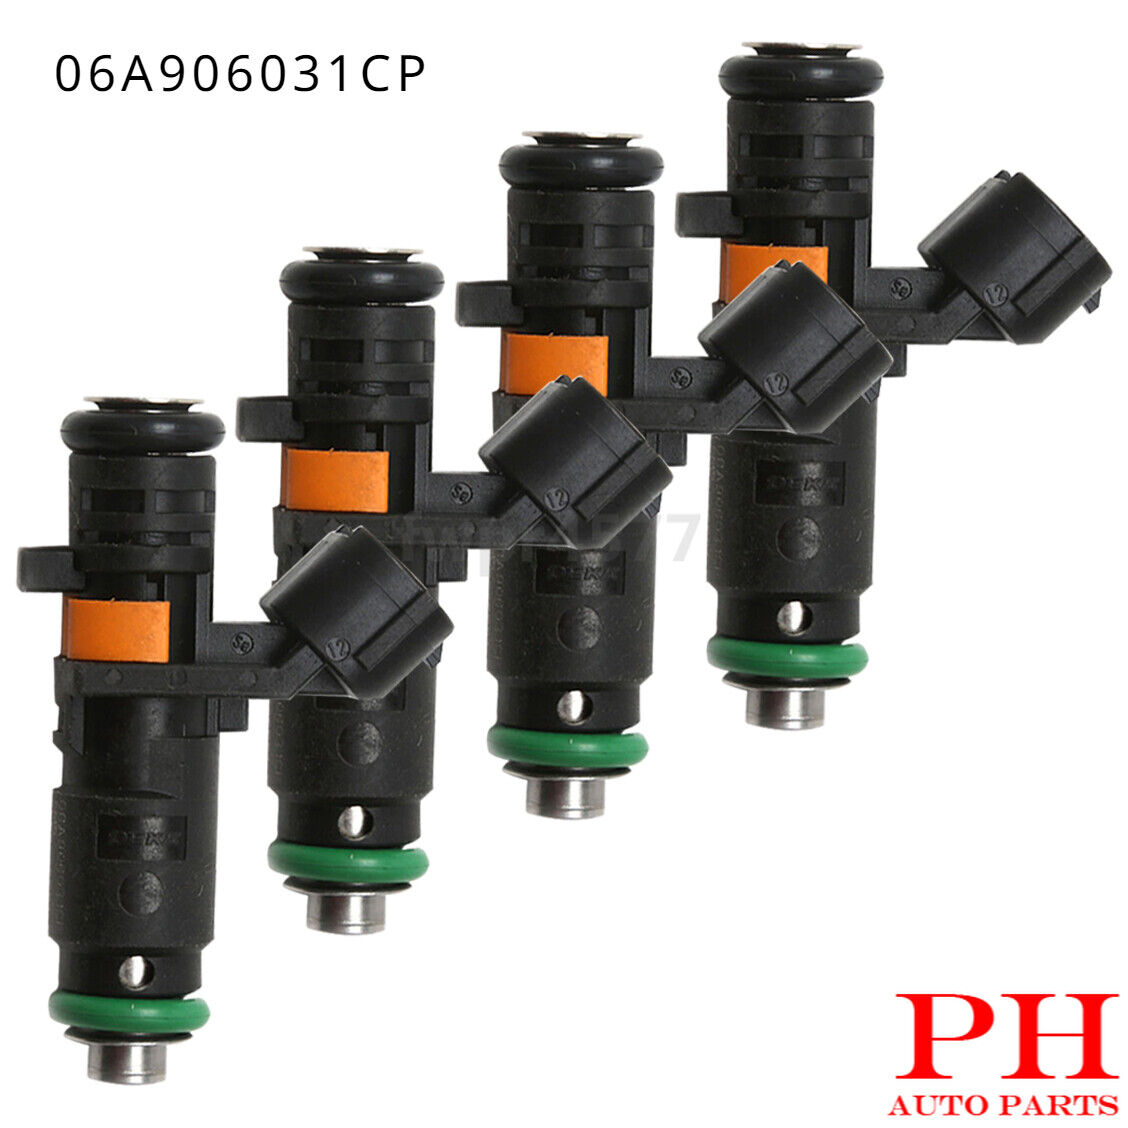 4x 06A906031CP Fuel Injector Fit For 11-18 VW Jetta 09-15 Seat Ibiza/ST 2.0L Gas